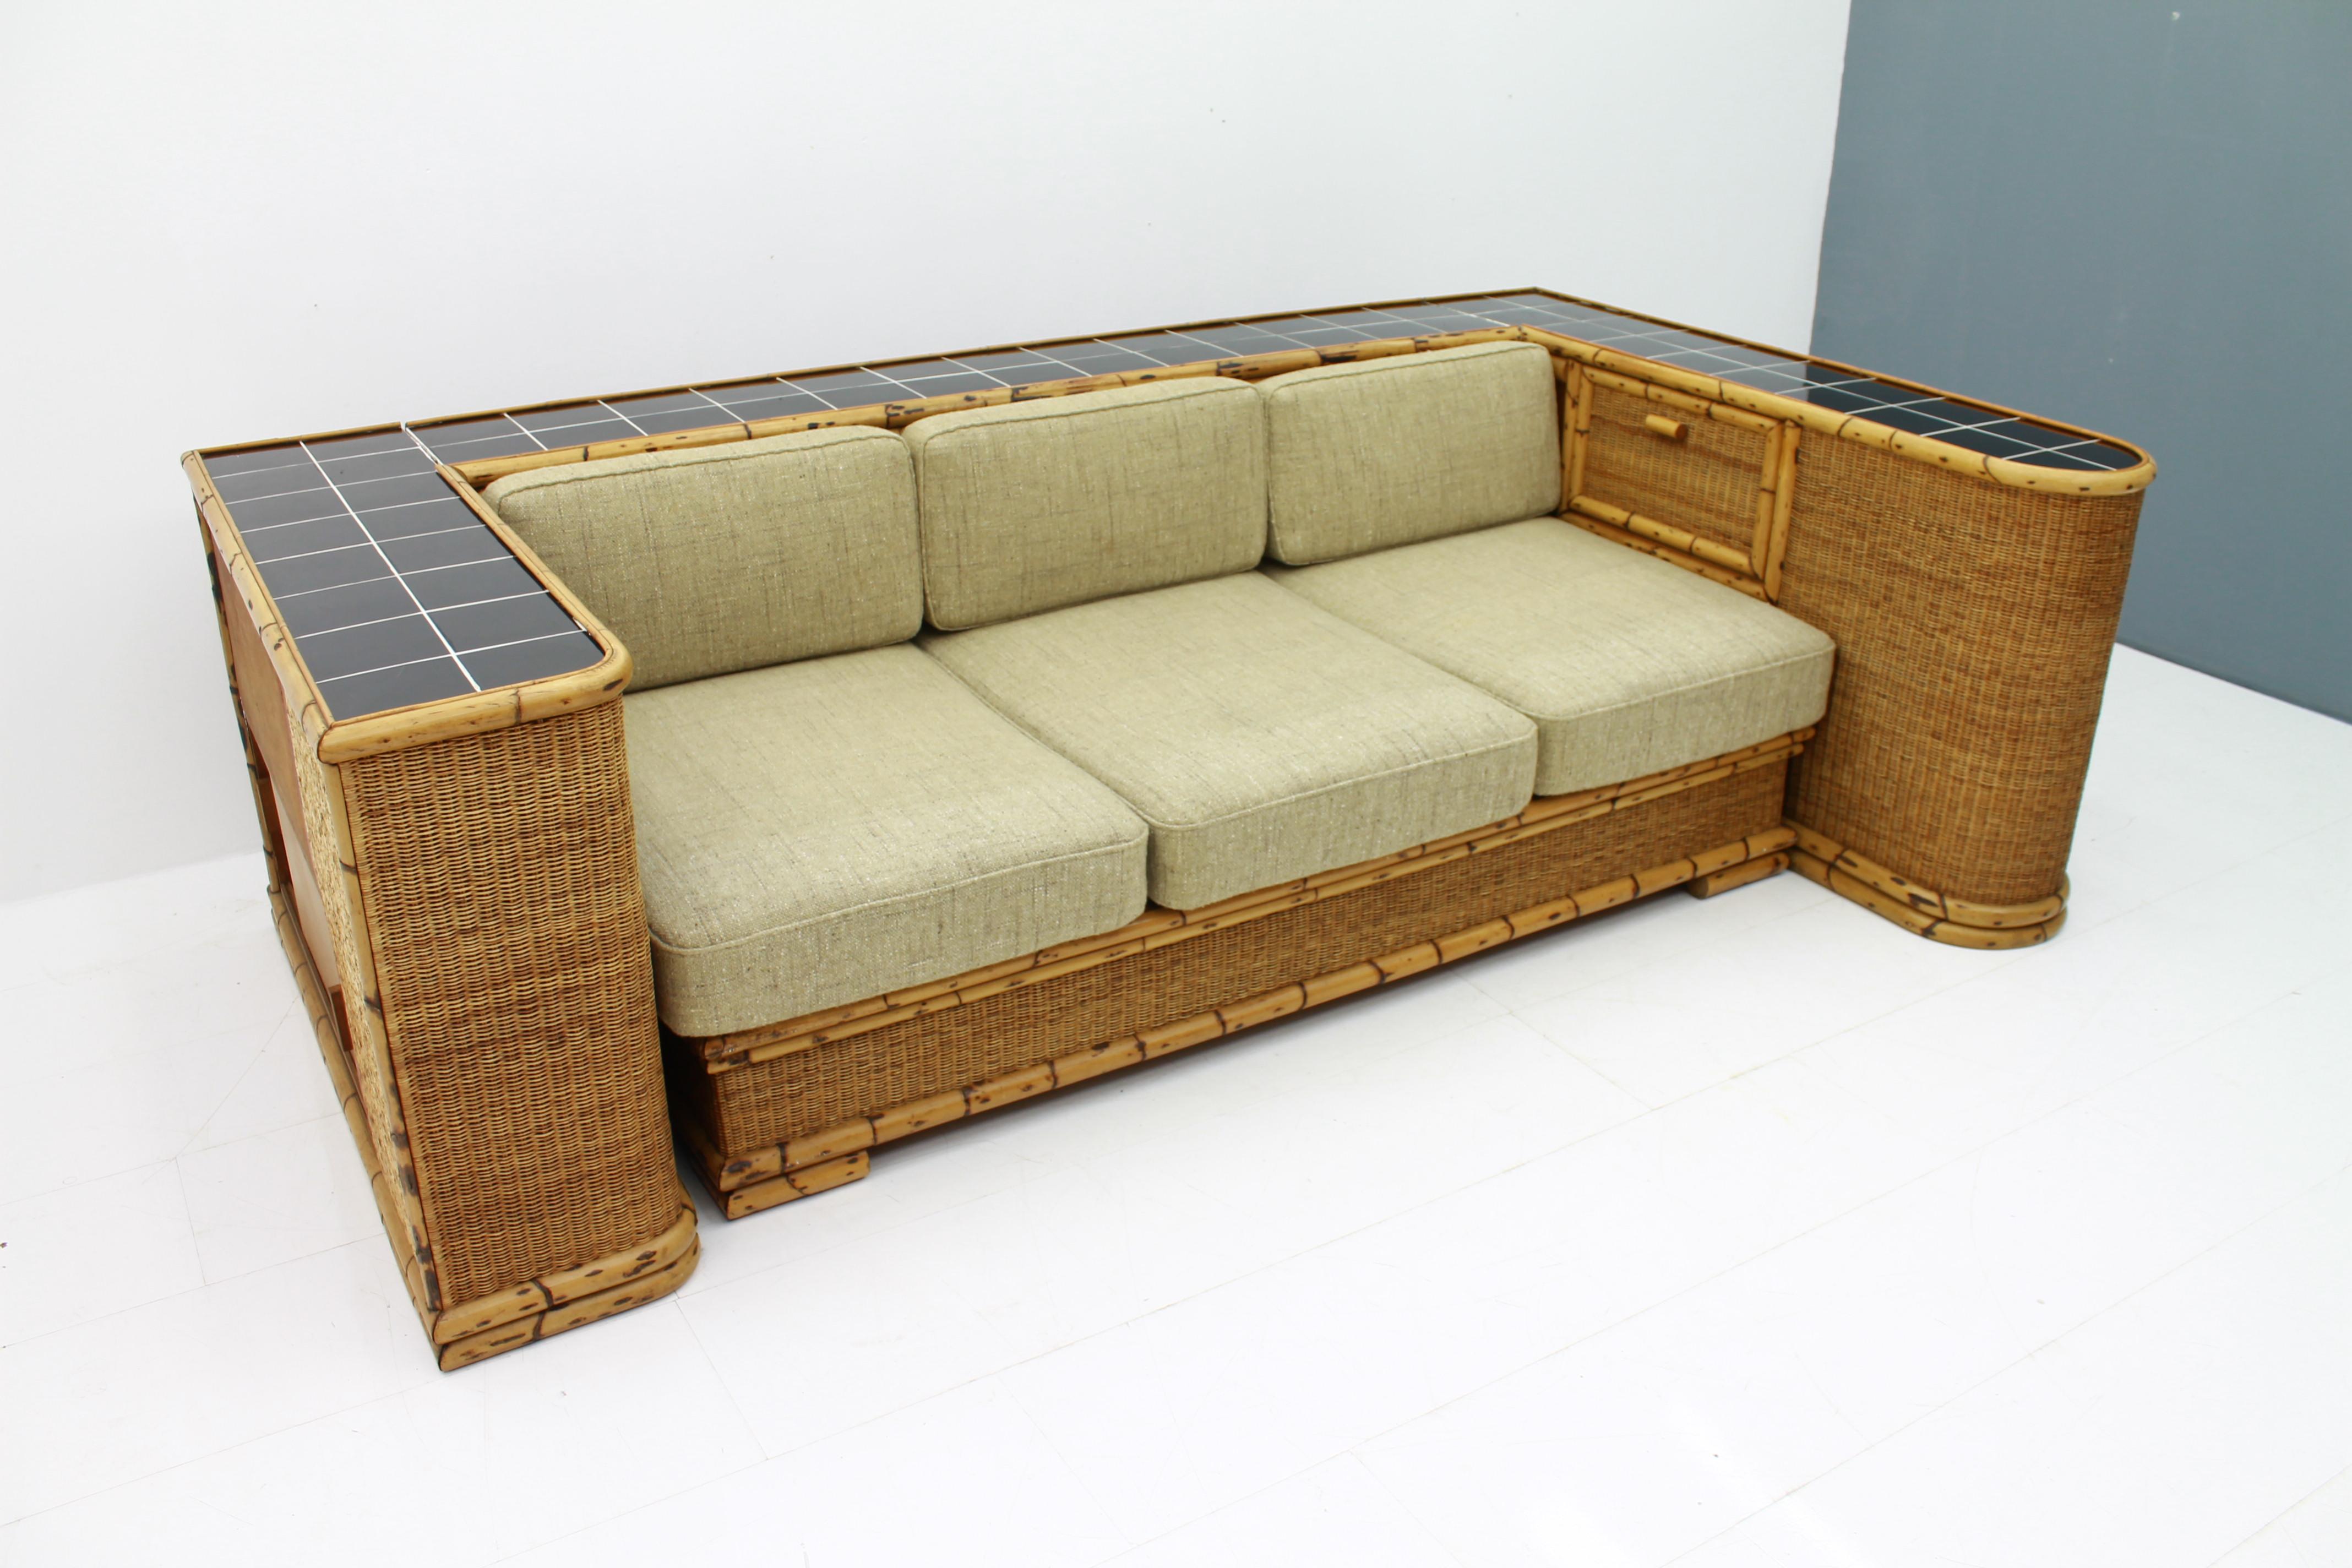 Ceramic Rare Art Deco Bamboo & Rattan Daybed Sofa Room Divider by Arco Germany 1940s